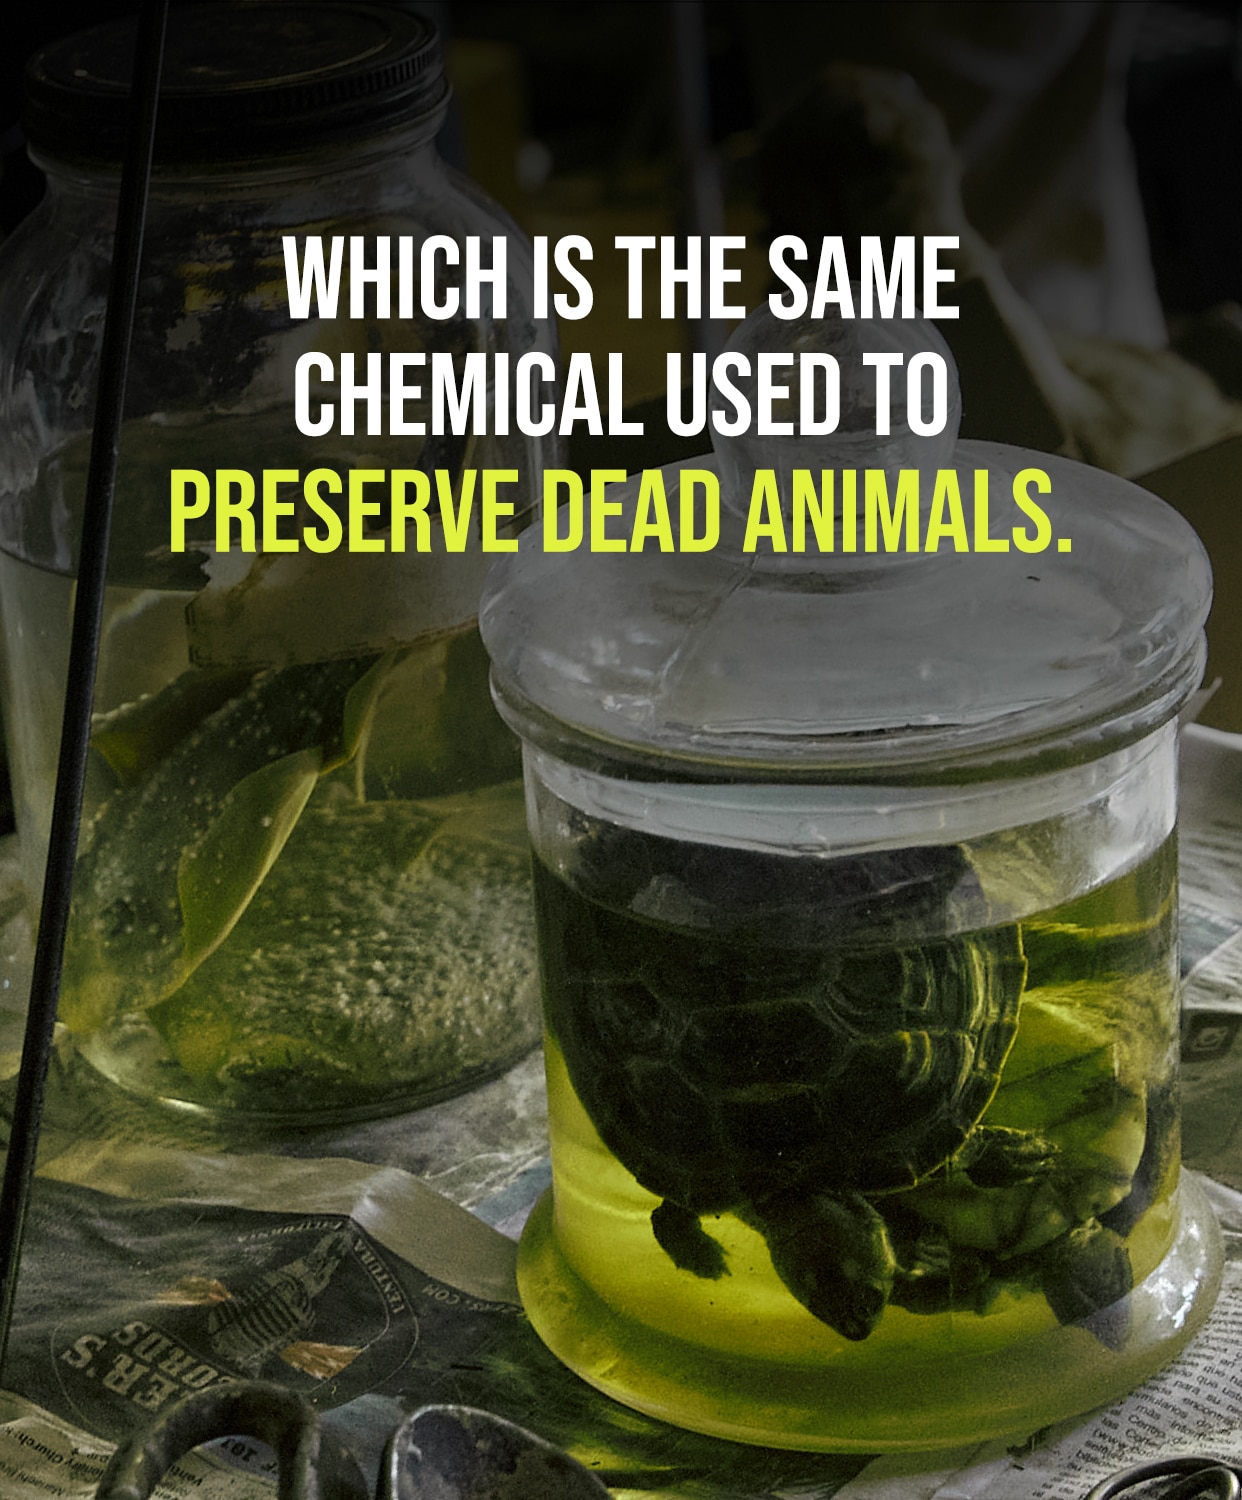 Which is the same chemical used to preserve dead animals